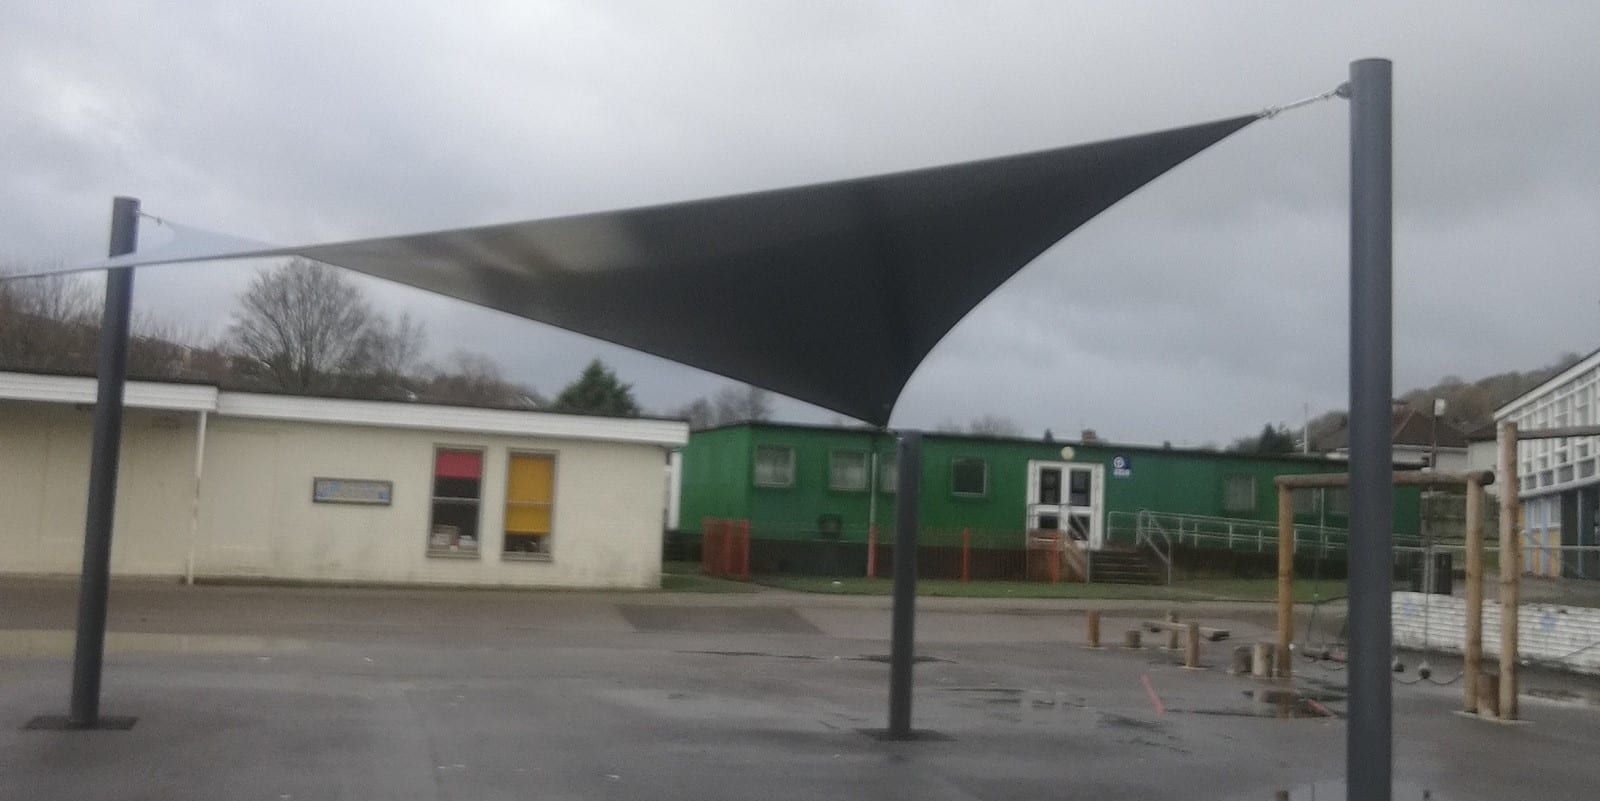 Sail Shade installed at Somerton Primary School